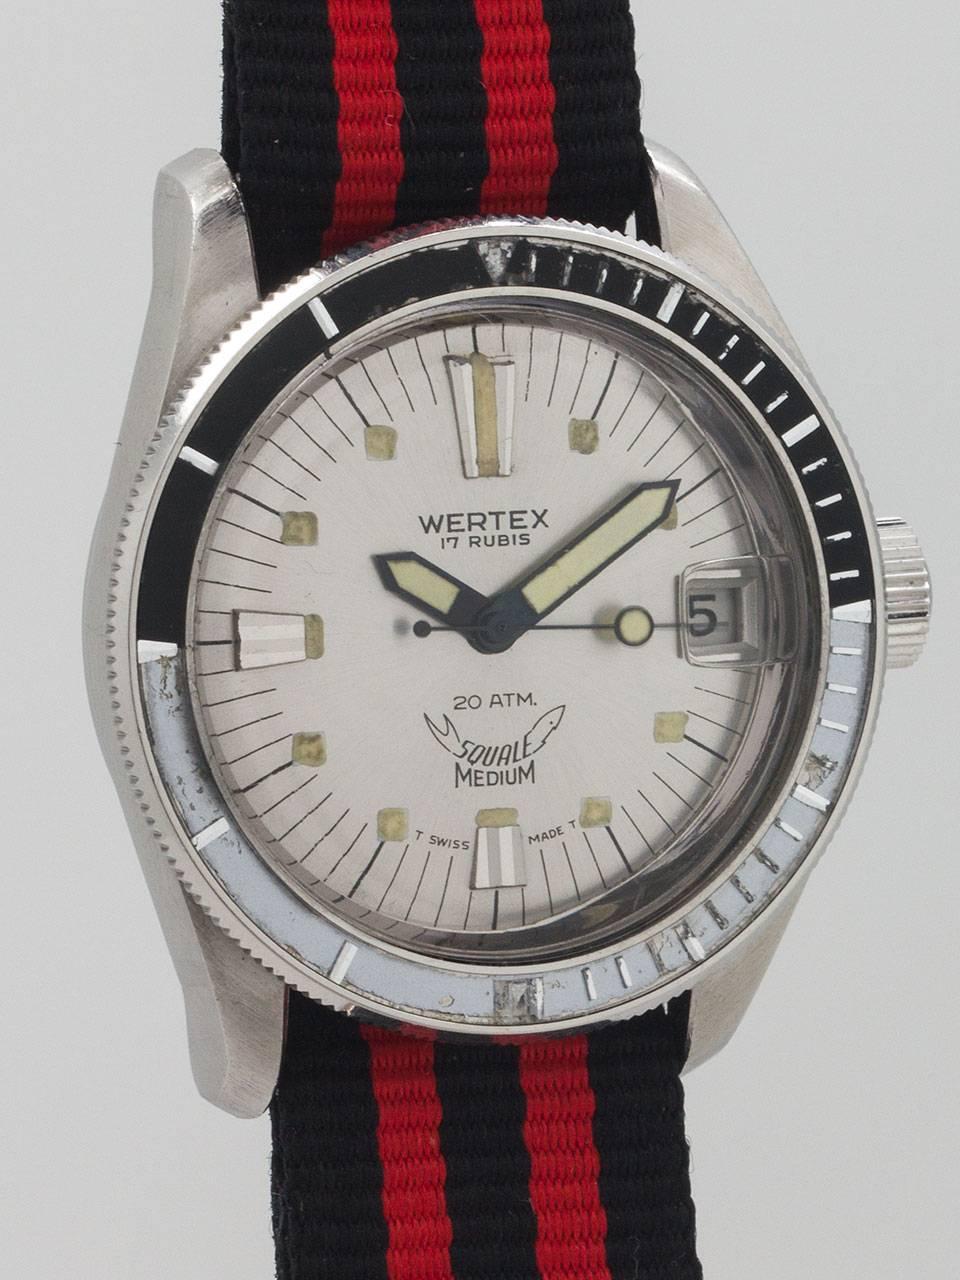 Men's Wertex Squale Stainless Steel Diver’s Self Winding Wristwatch, circa 1960 For Sale